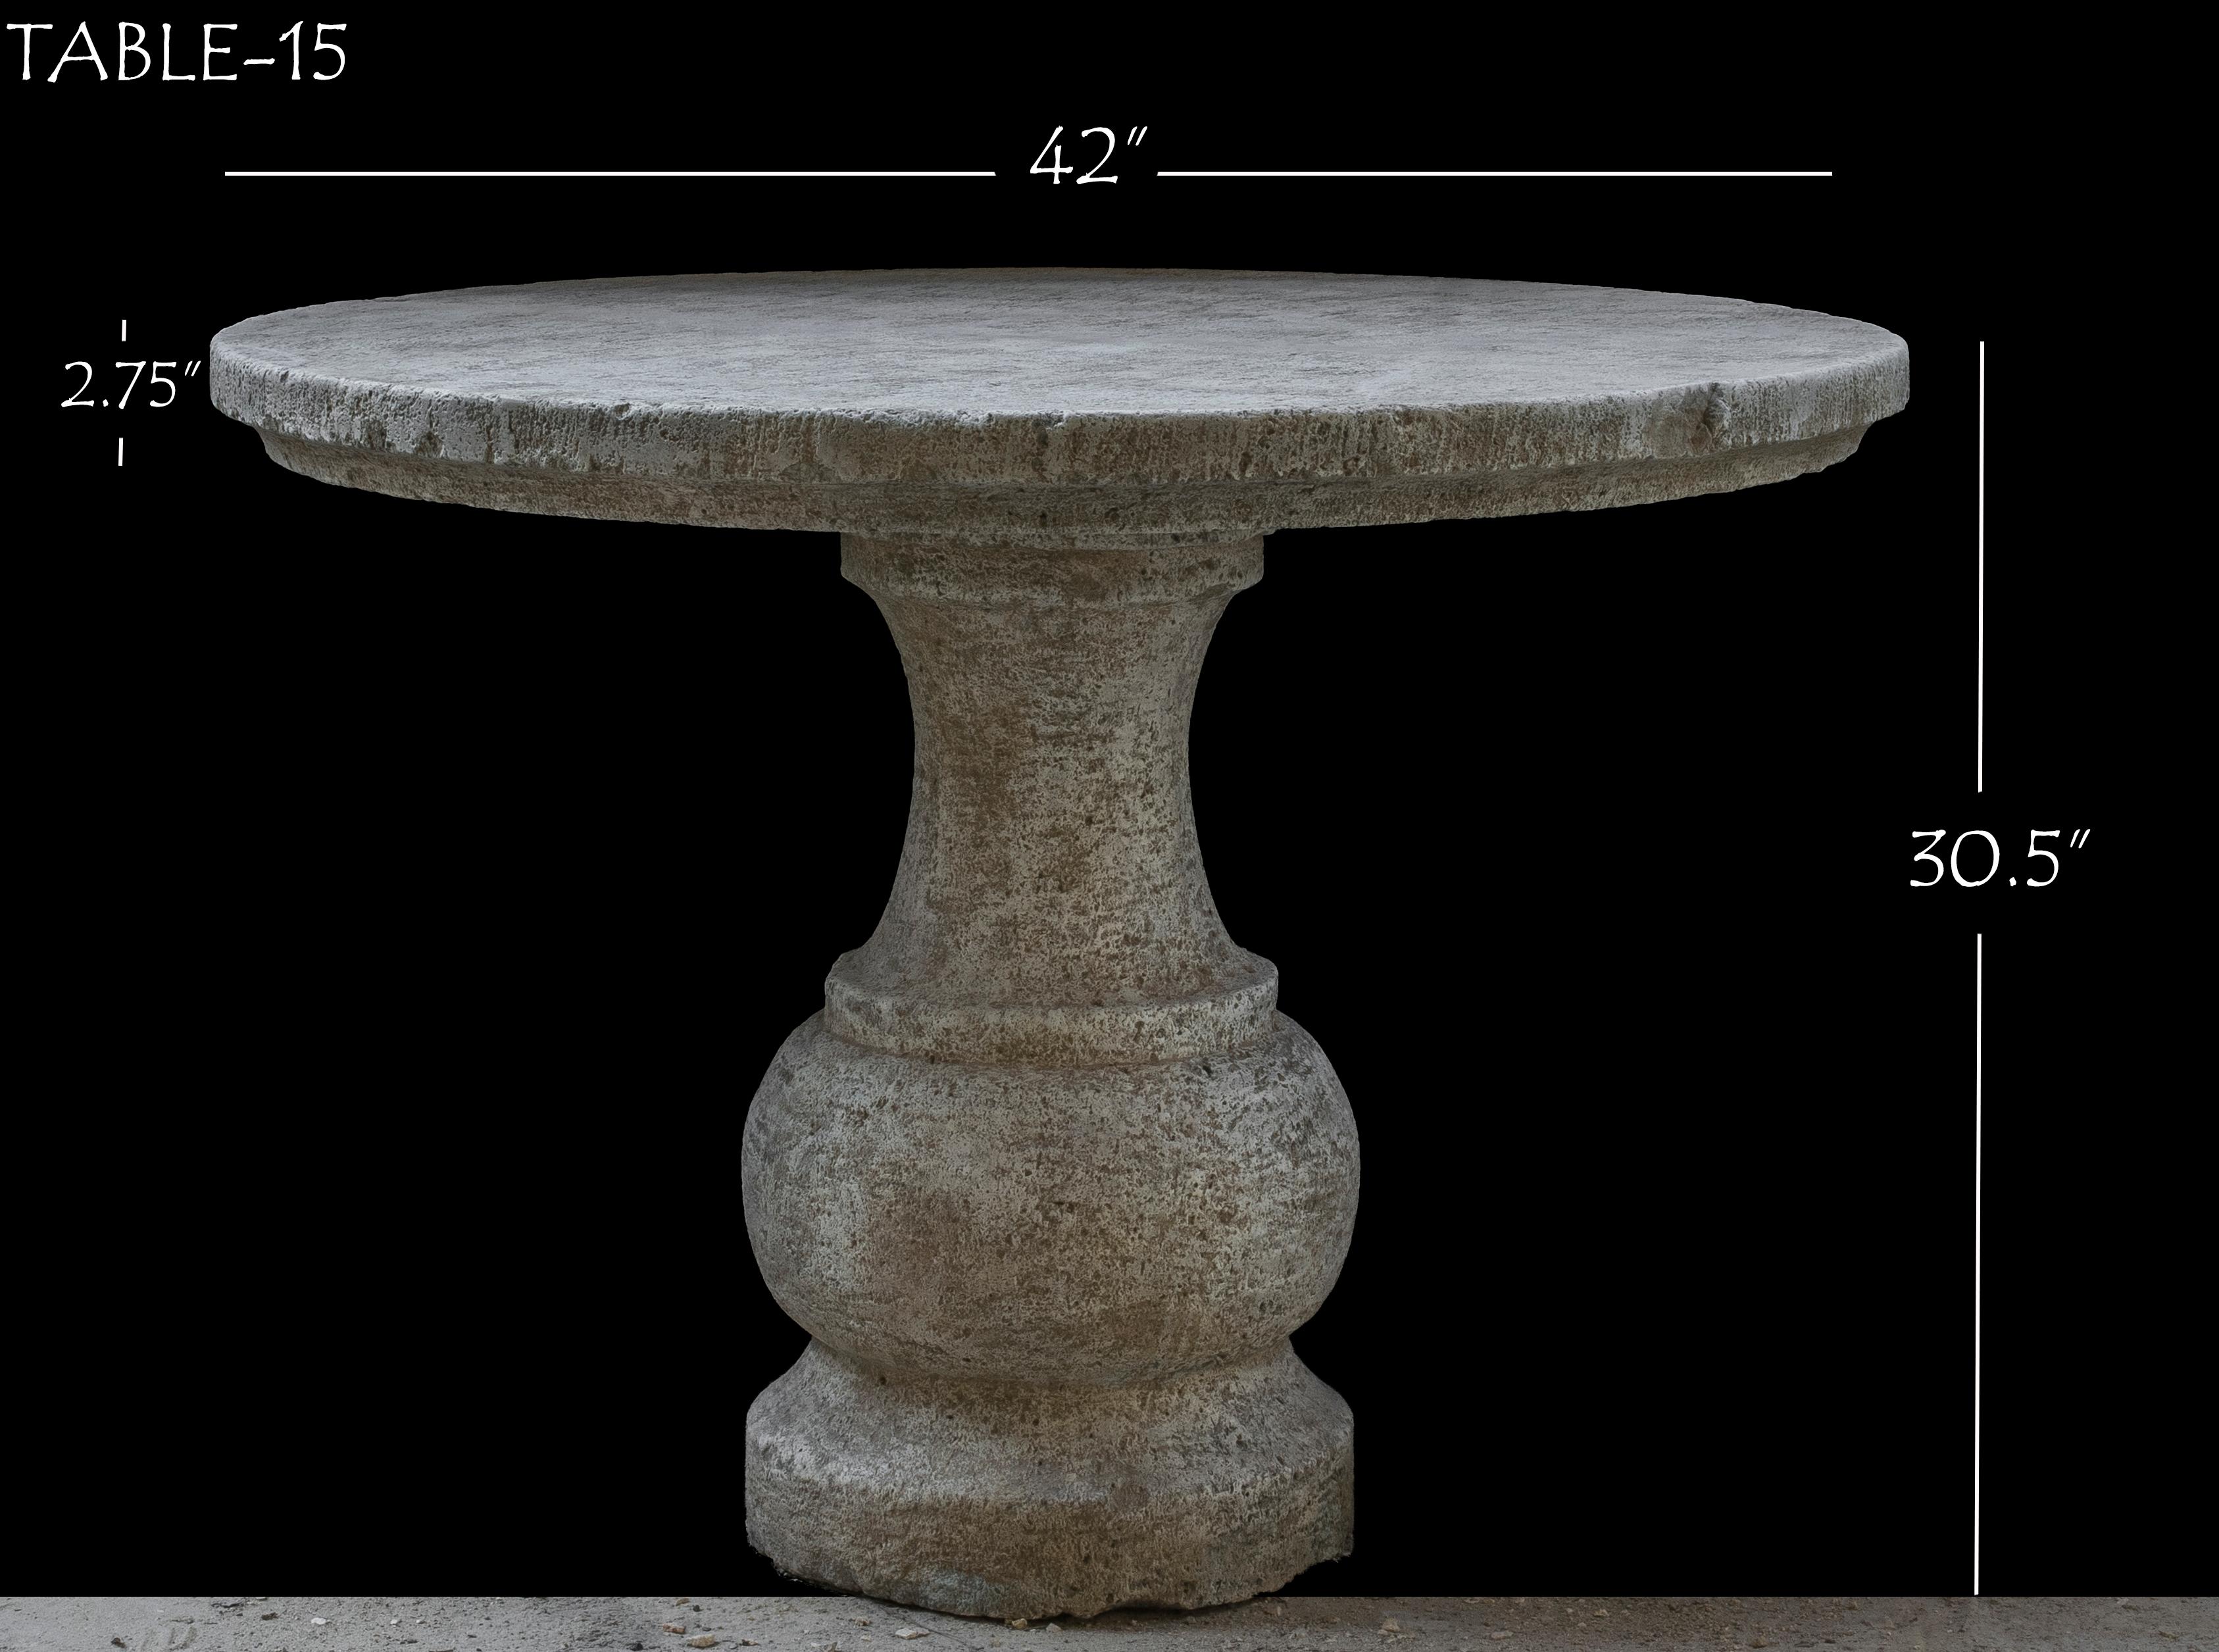 This 18th C. reclaimed limestone table,
It developed a beautiful patina throughout the years.
This Table is suitable for interior and exterior applications,
and could withstand extreme Temperatures and Freezing weathers.